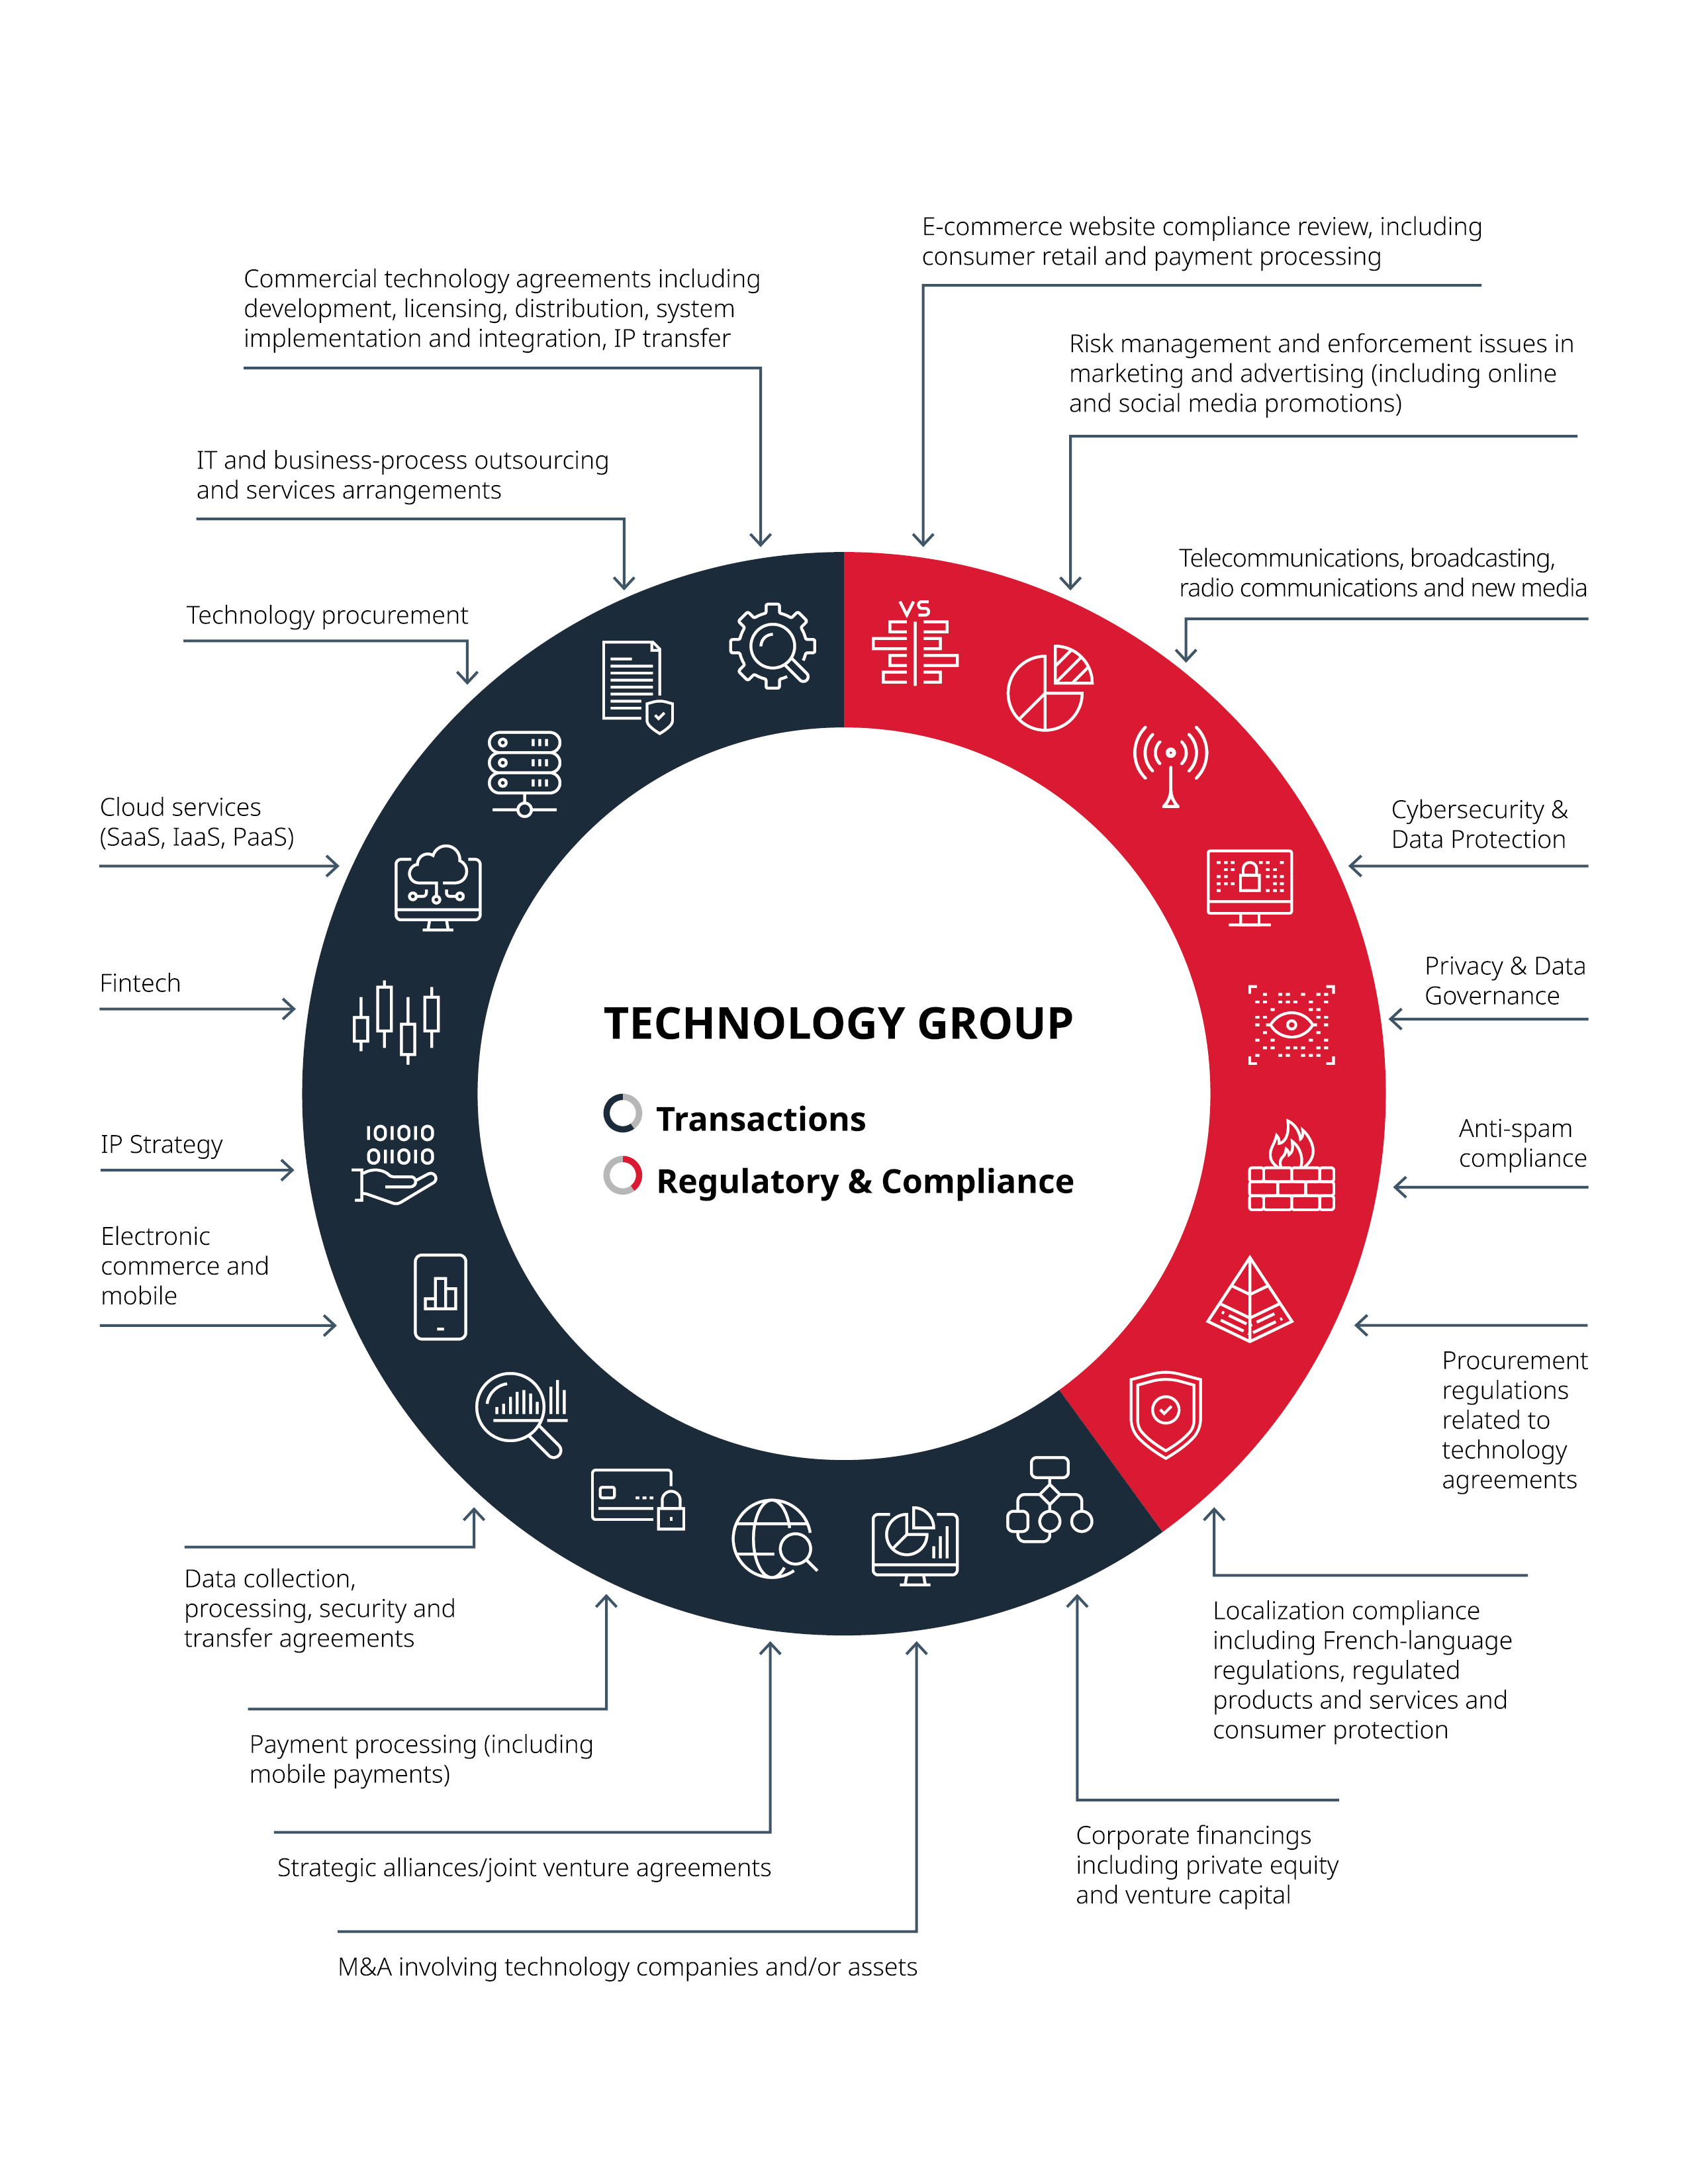 Technology Group Map